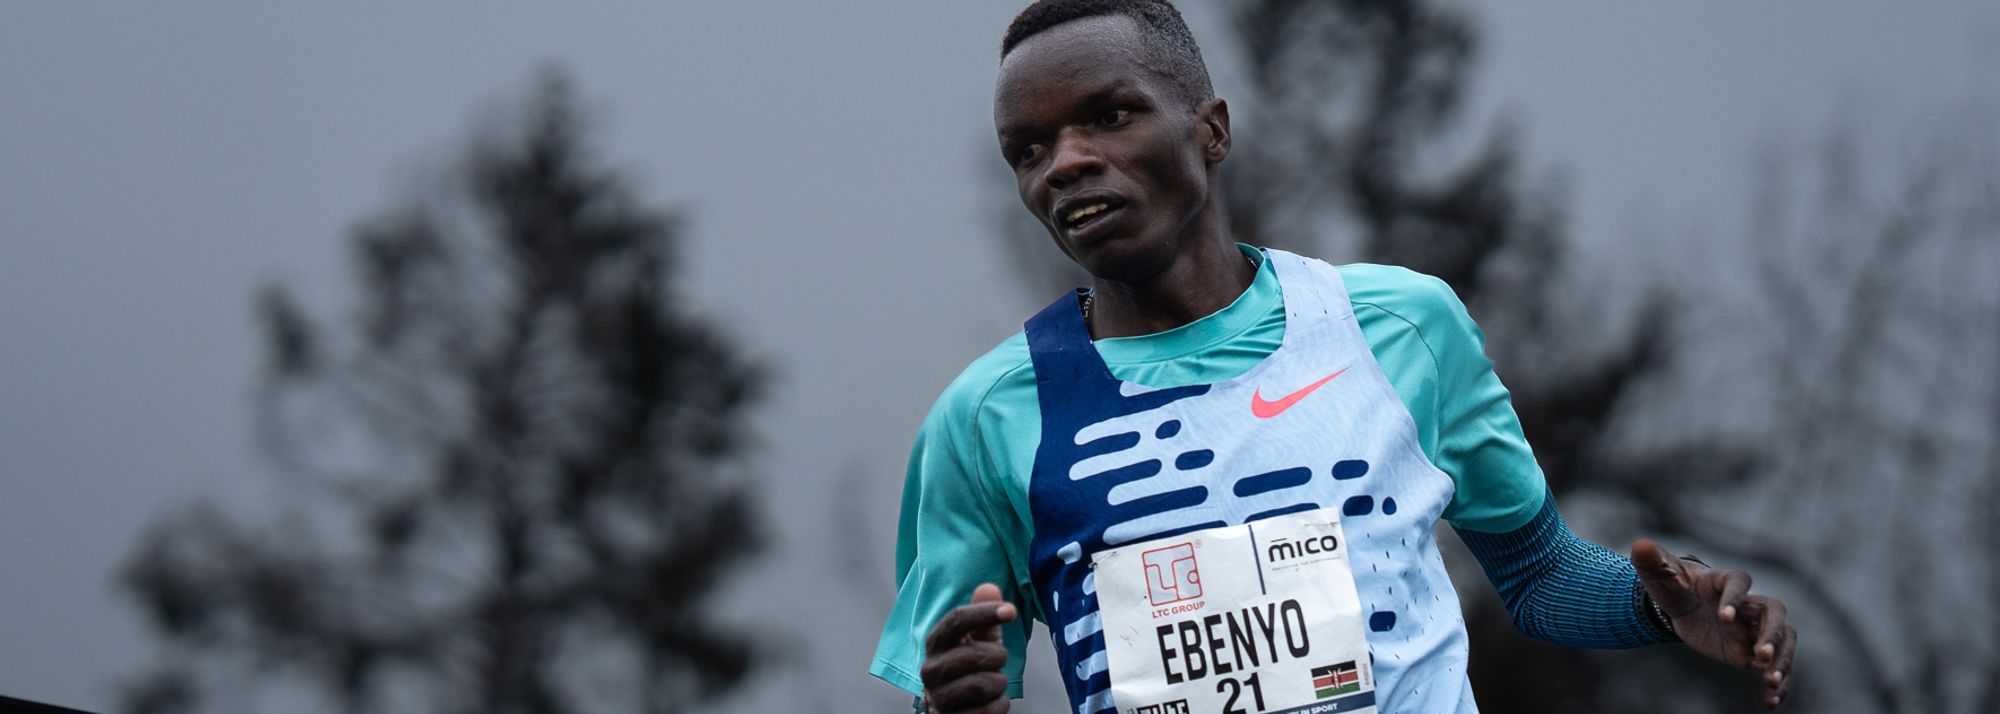 Daniel Ebenyo and Emmaculate Anyango Acholi are among the leading athletes in action as the World Athletics Cross Country Tour Gold makes a stop in Kenya's Great Rift Valley